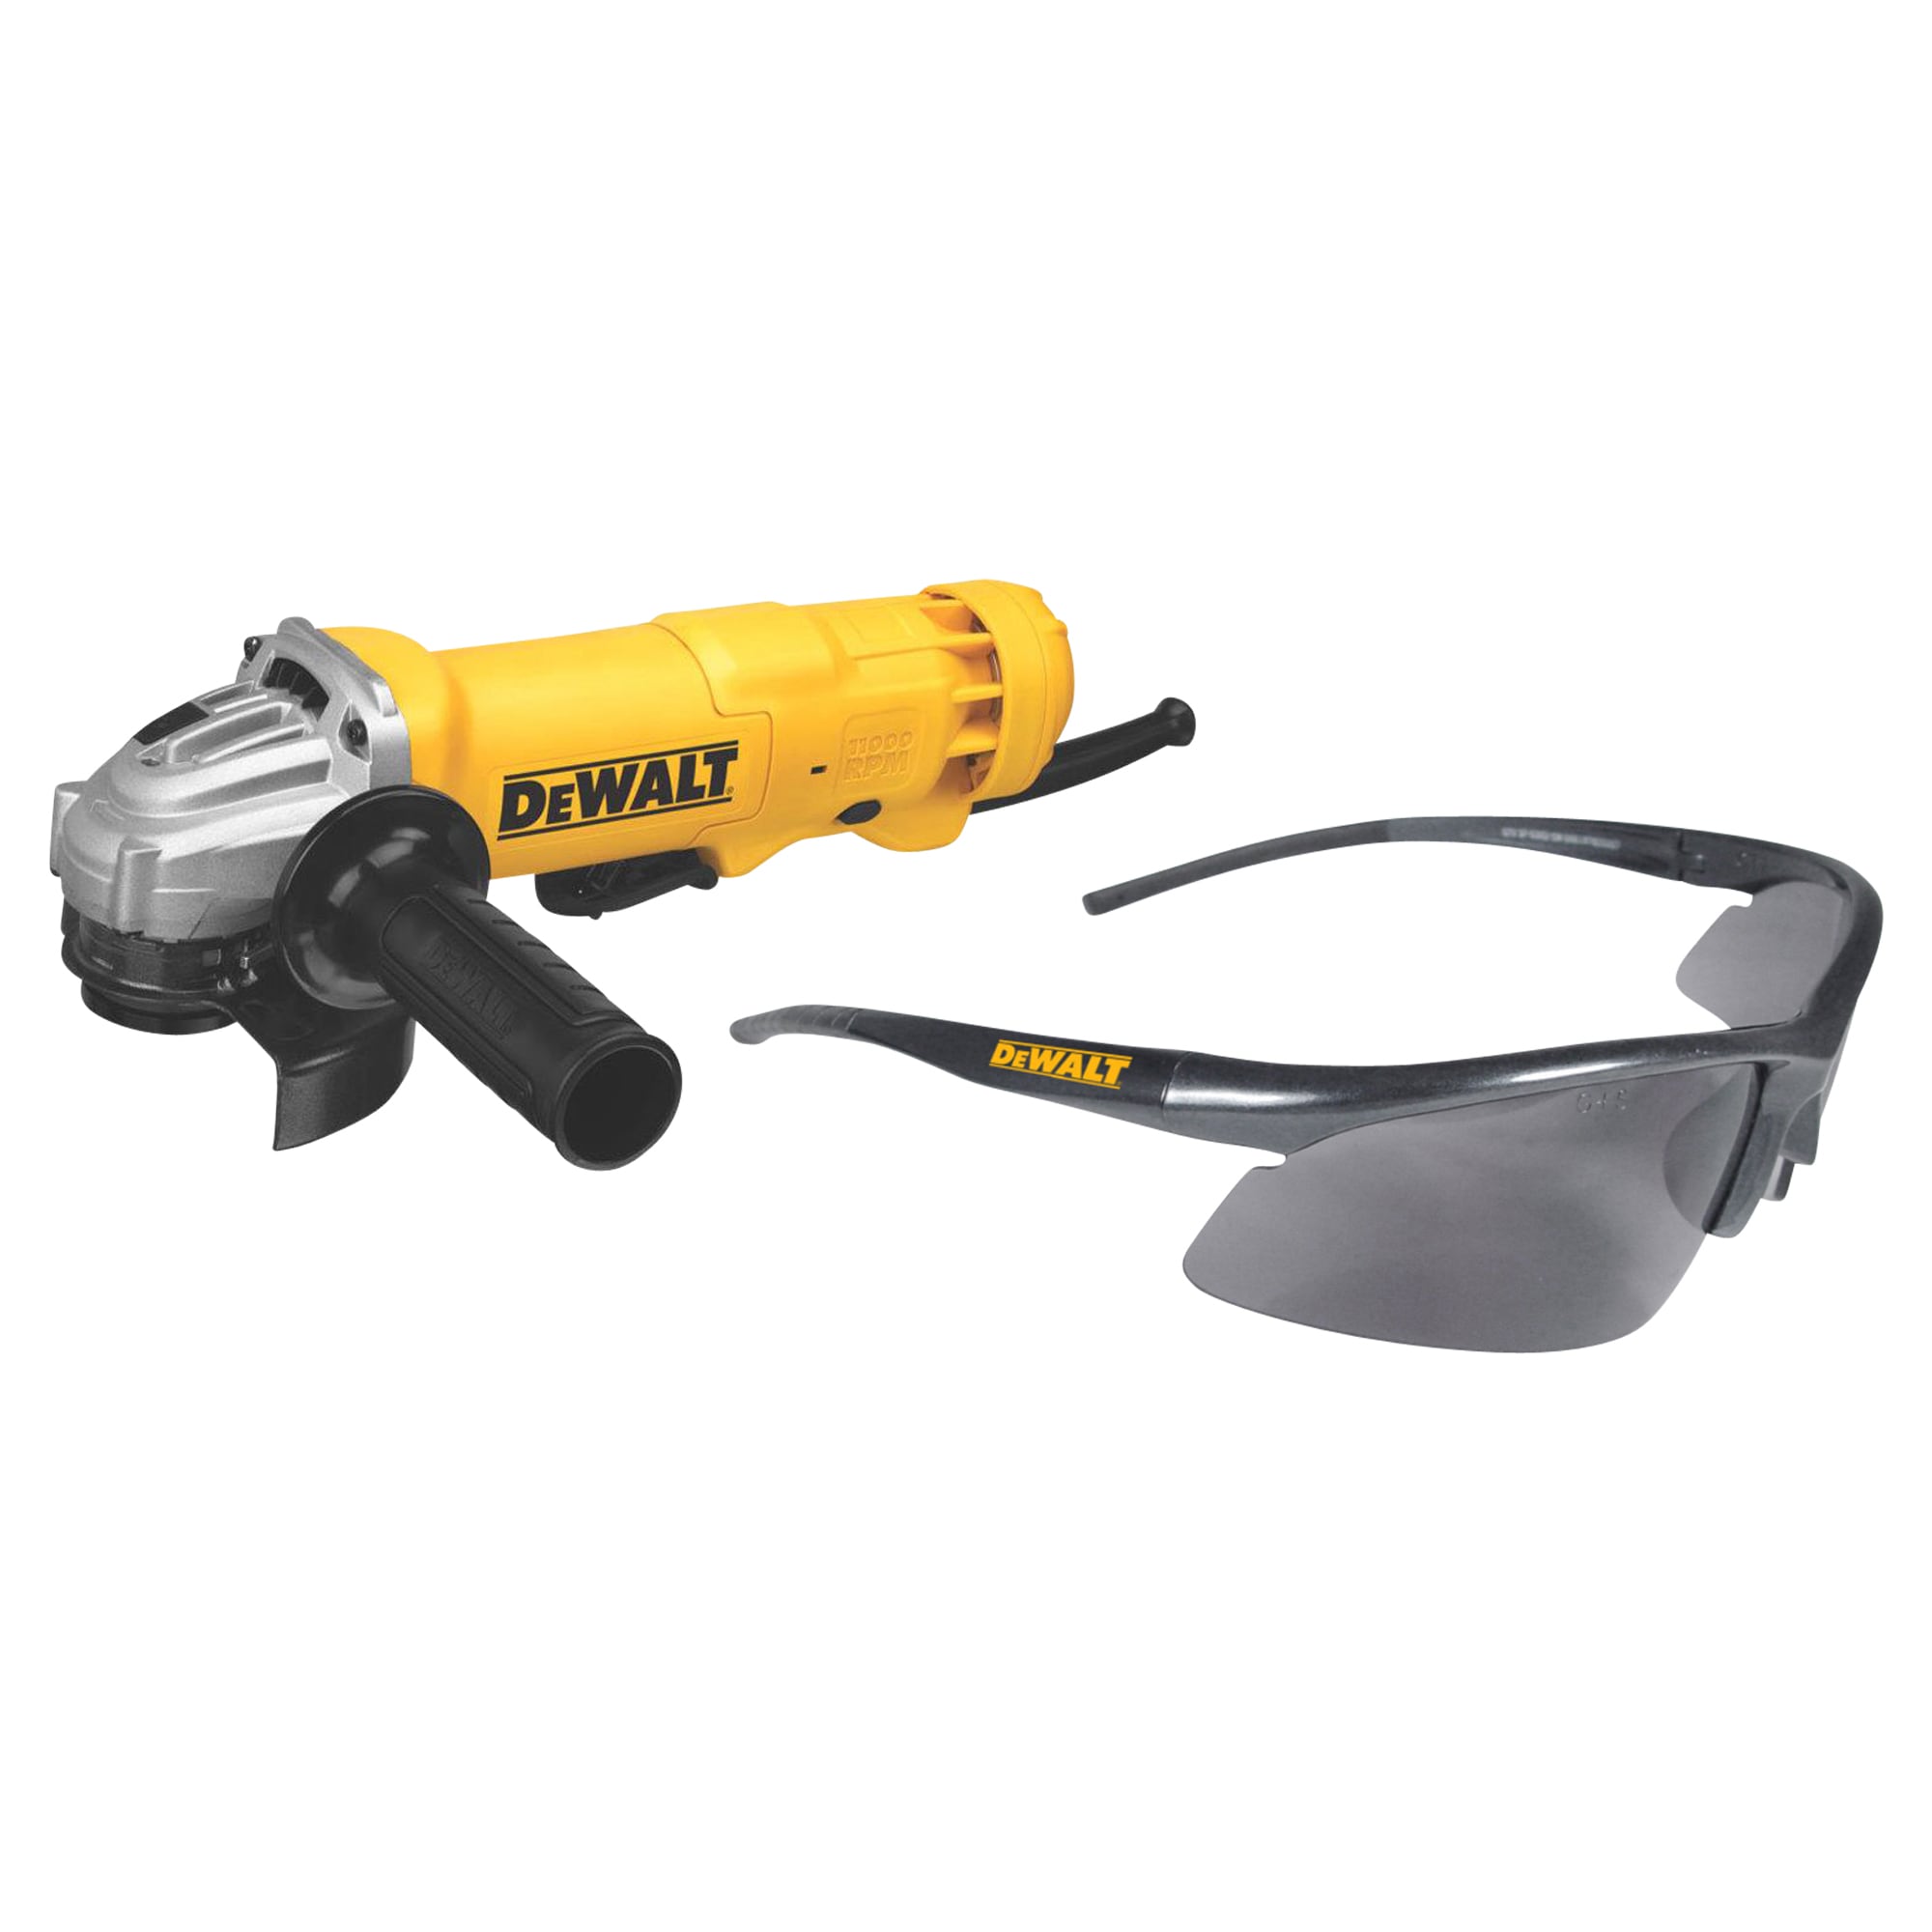 11 Amp Corded 4.5 in. Small Angle Grinder